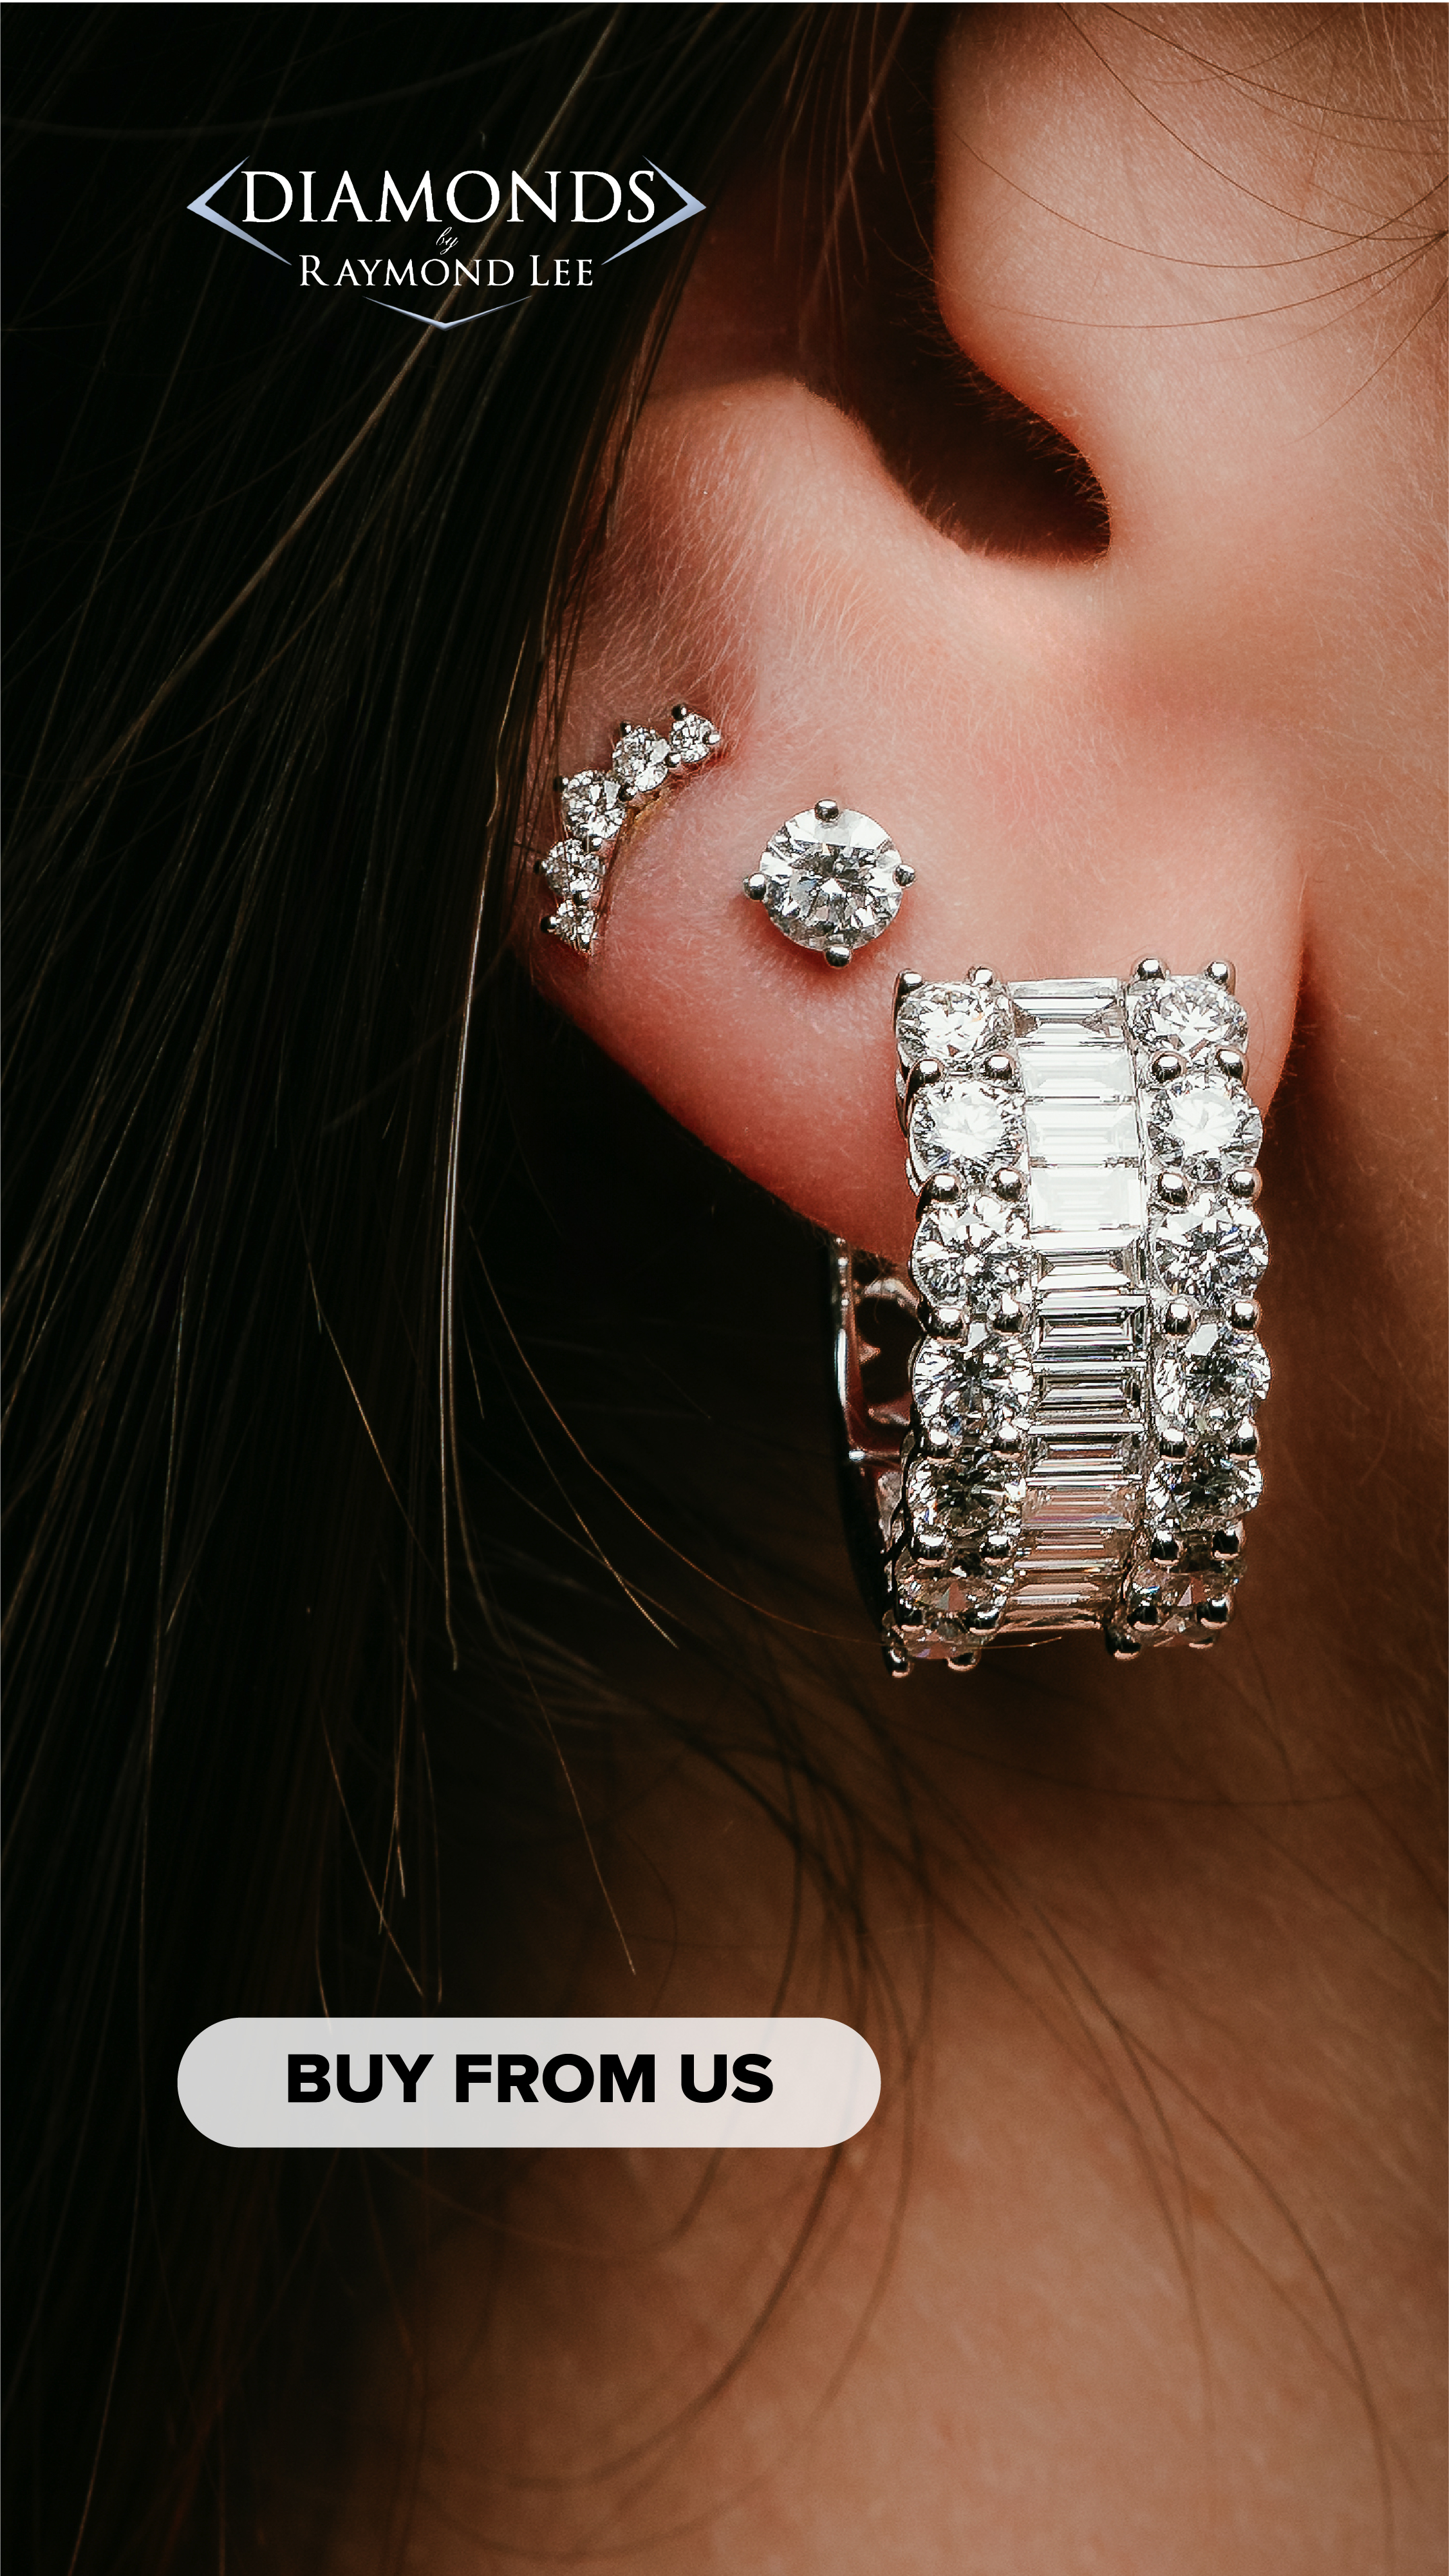 a close up of a woman's ear with a pair of diamond earrings